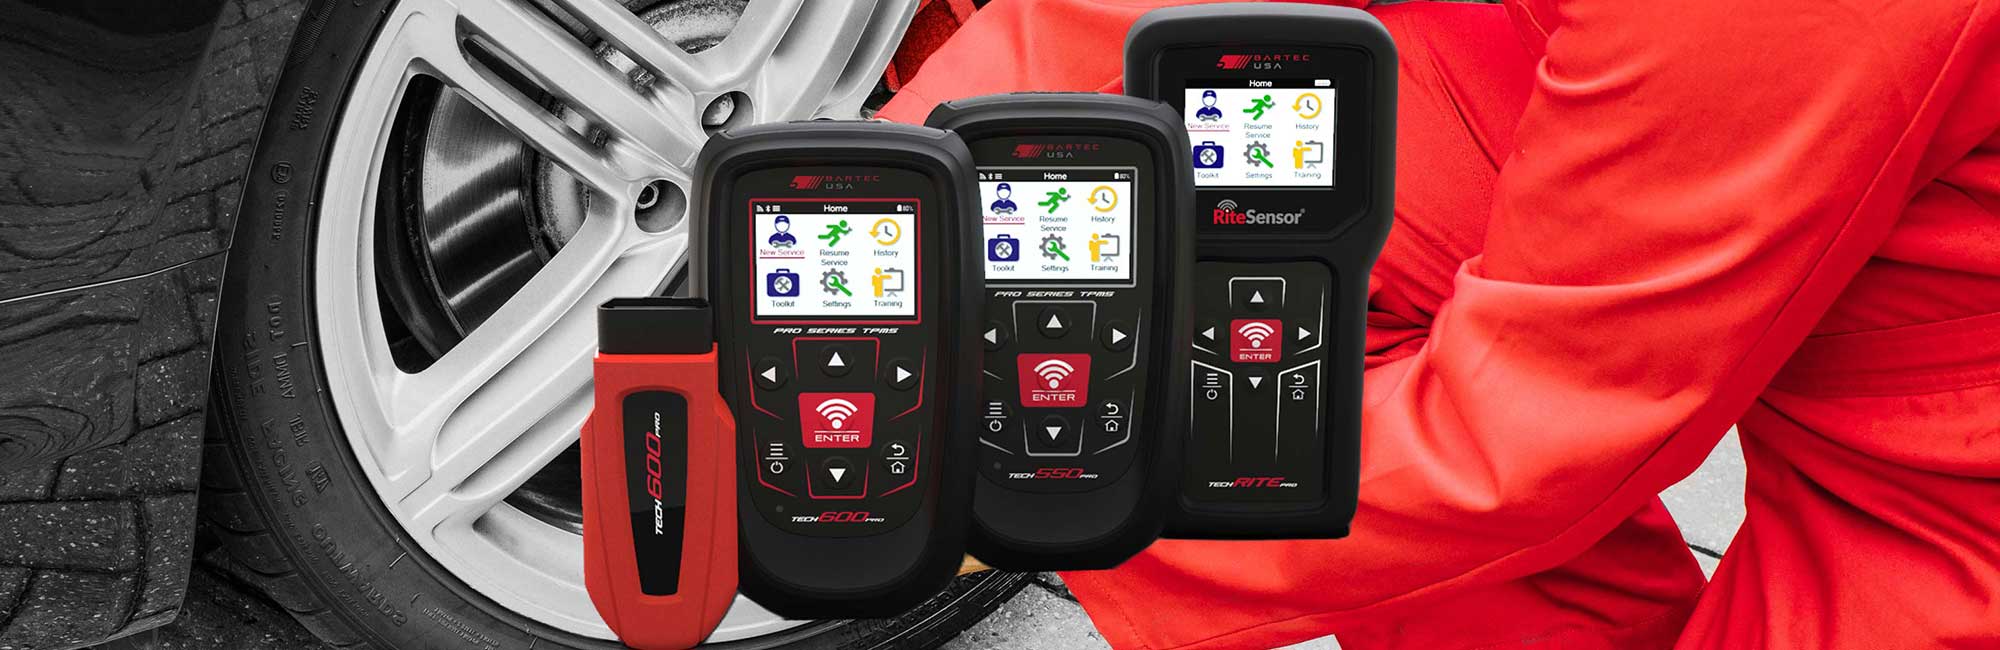 Outils TPMS